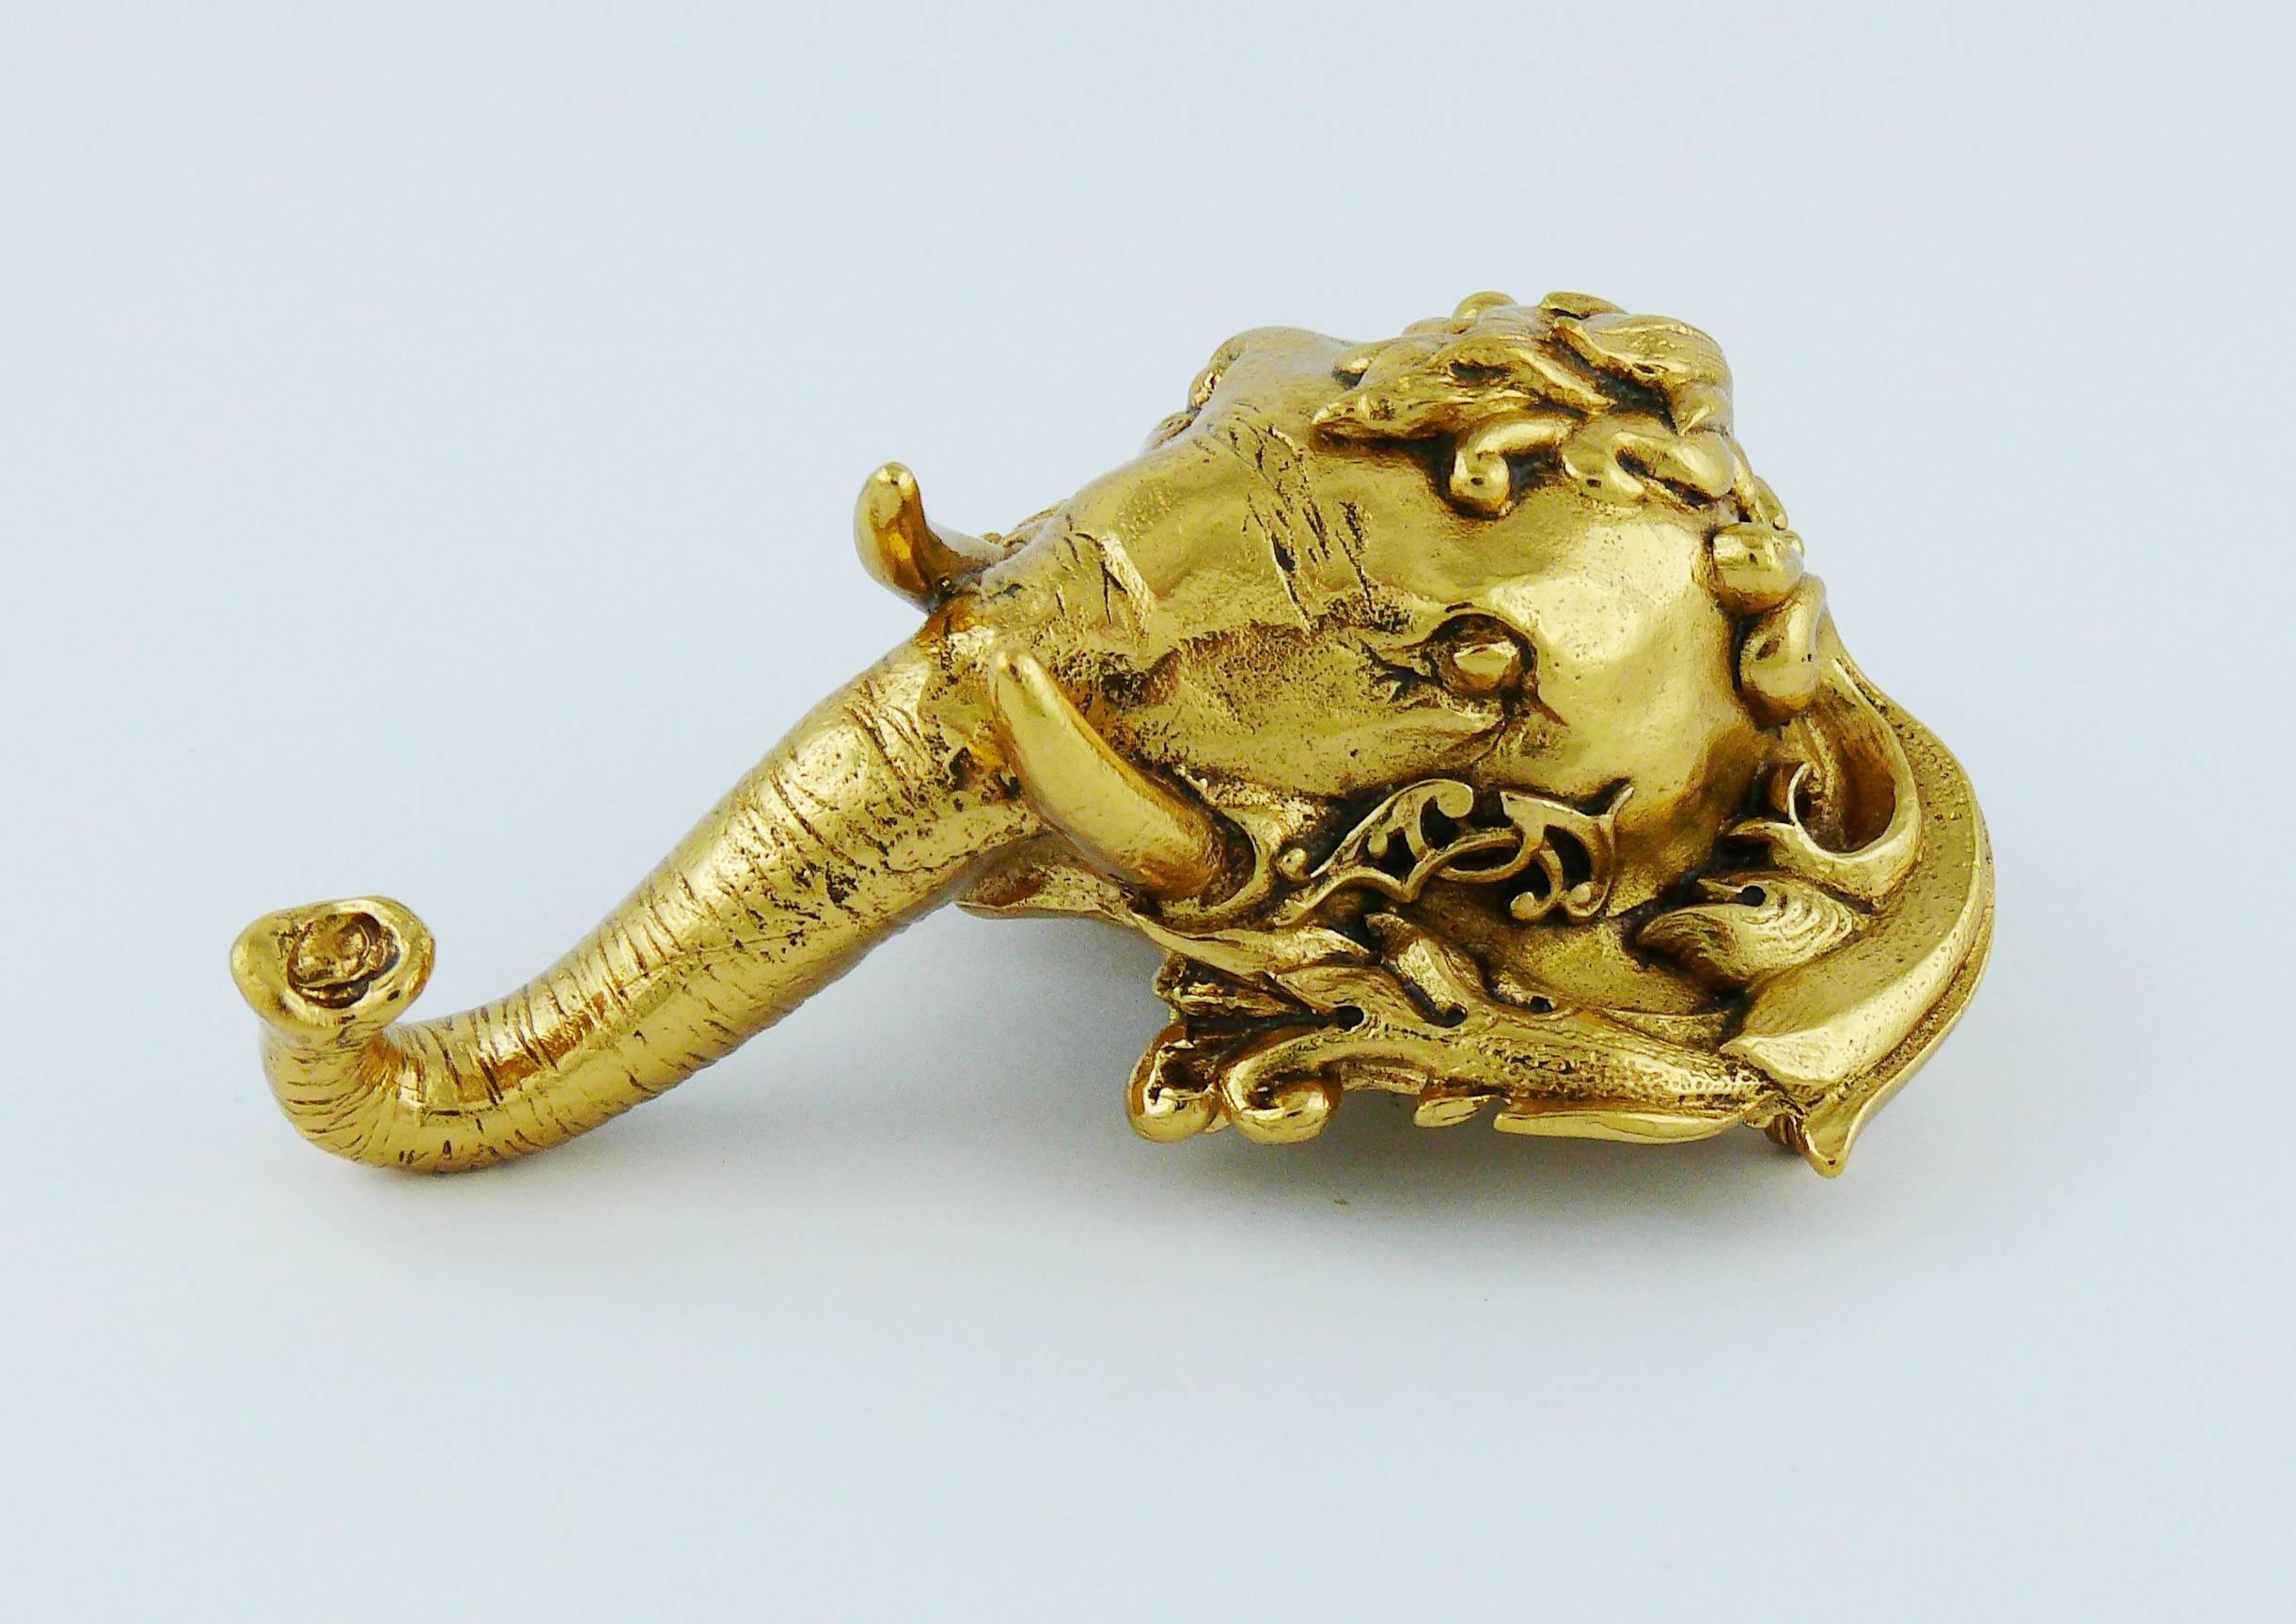 CHRISTIAN DIOR Boutique vintage rare massive gold toned with antique patina brooch/pendant featuring an elephant head.

Marked CHRISTIAN DIOR Boutique.

Indicative measurements : max. height approx. 8 cm (3.15 inches) / max. width approx. 5.7 cm